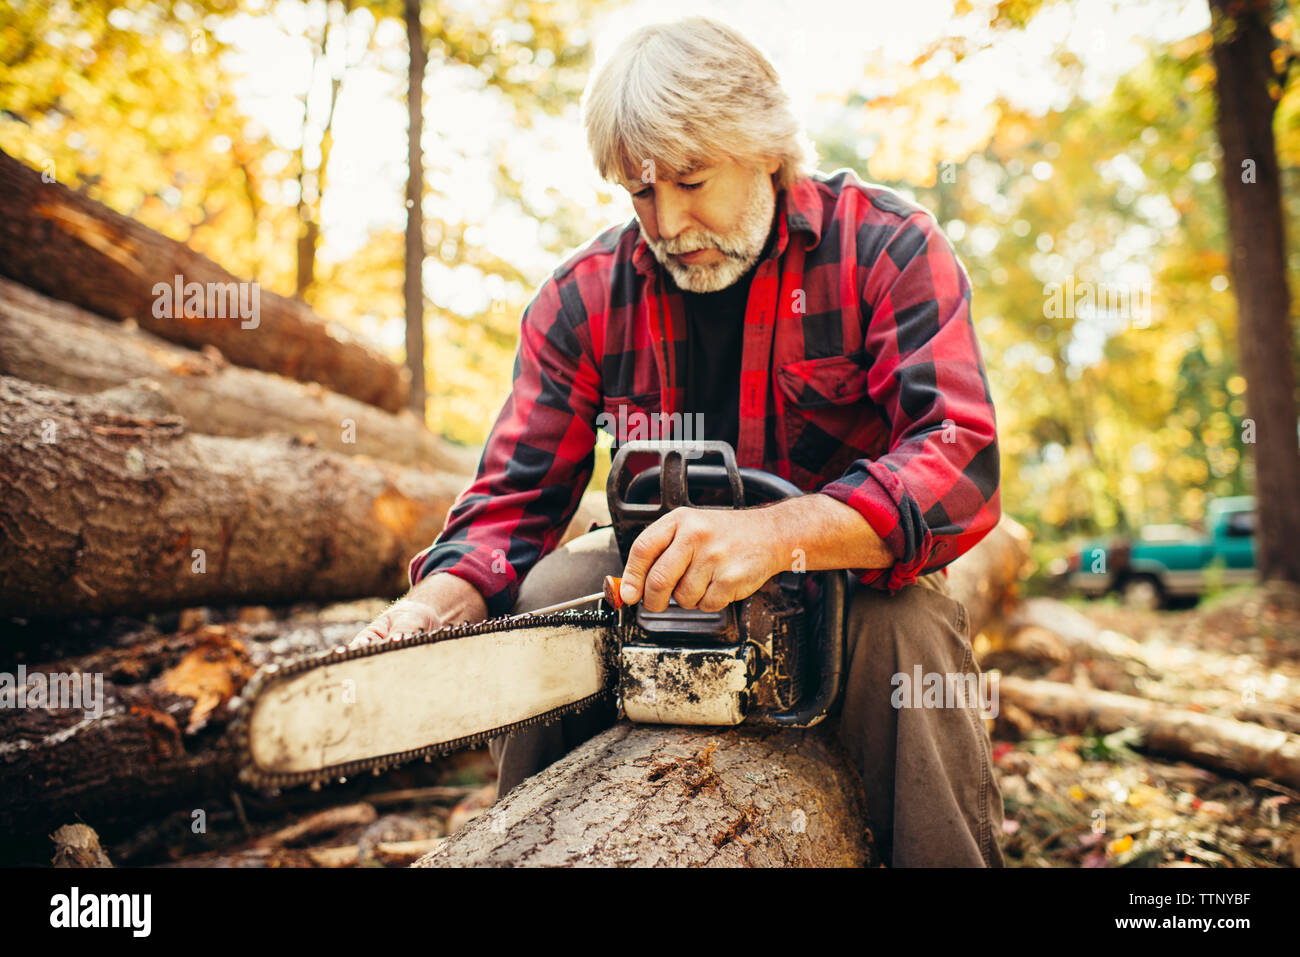 Male lumberjack examining chainsaw while sitting on log in forest Stock Photo